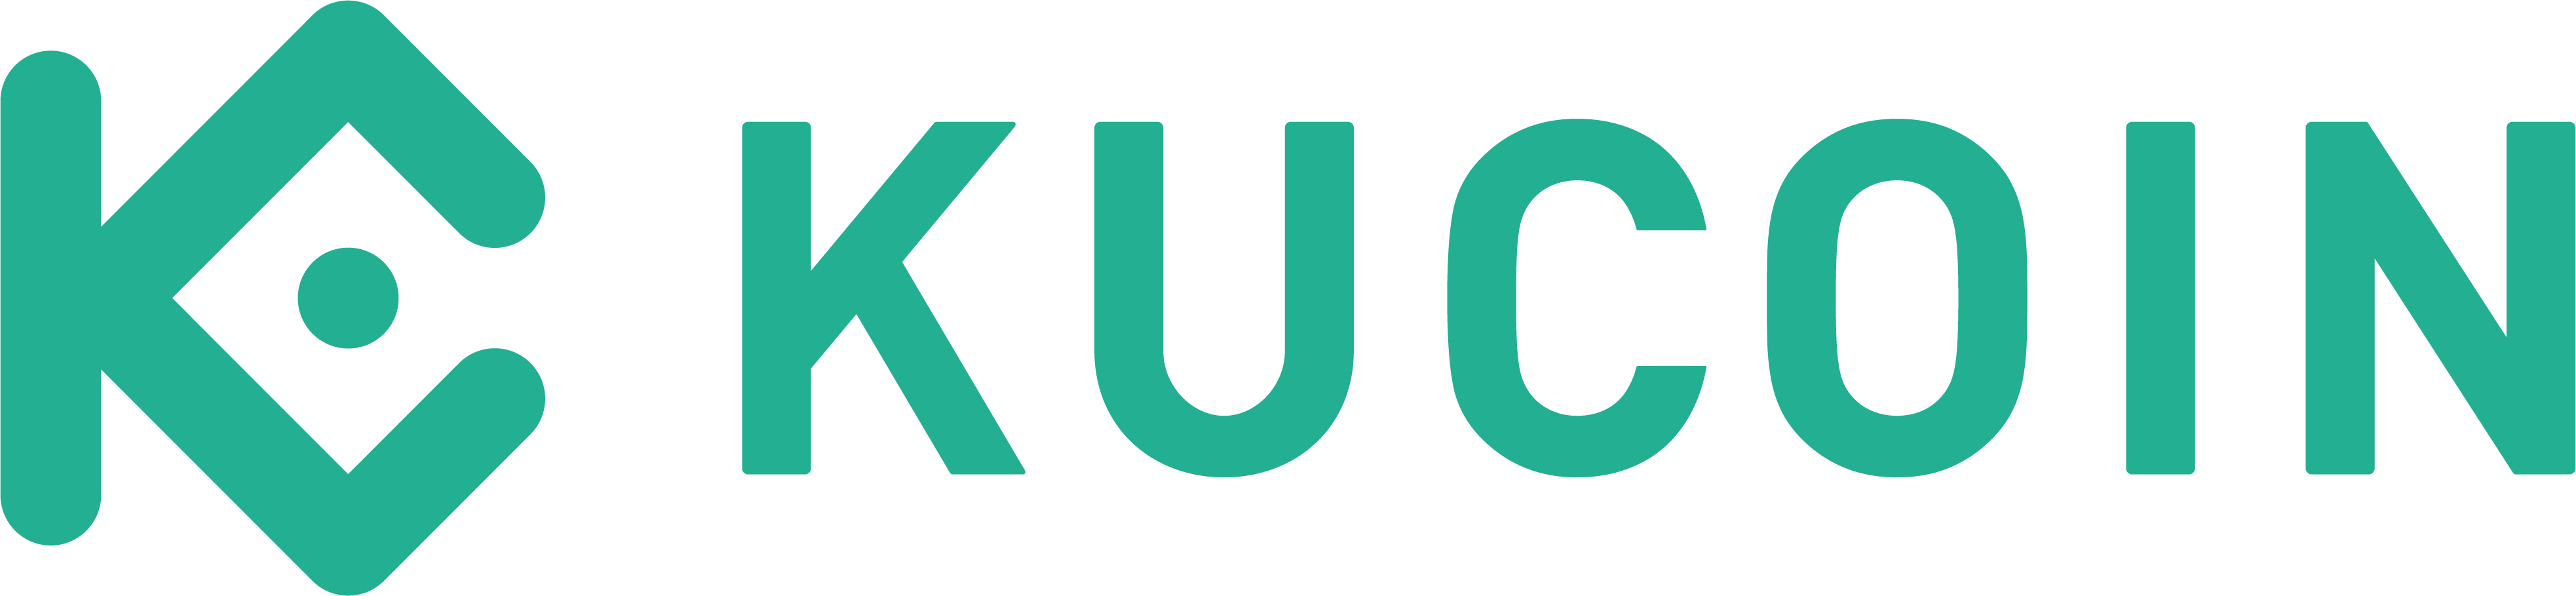 KuCoin: Cryptocurrency Exchange, Buy & Sell Bitcoin. Kucoin is the most advanced and secure cryptocurrency exchange to buy and sell Bitcoin, Ethereum, Litecoin, TRON, USDT, NEO, XRP, KCS, and more. KuCoin also provide Excellent Support, Maker & Taker Transaction Fees, Open API.